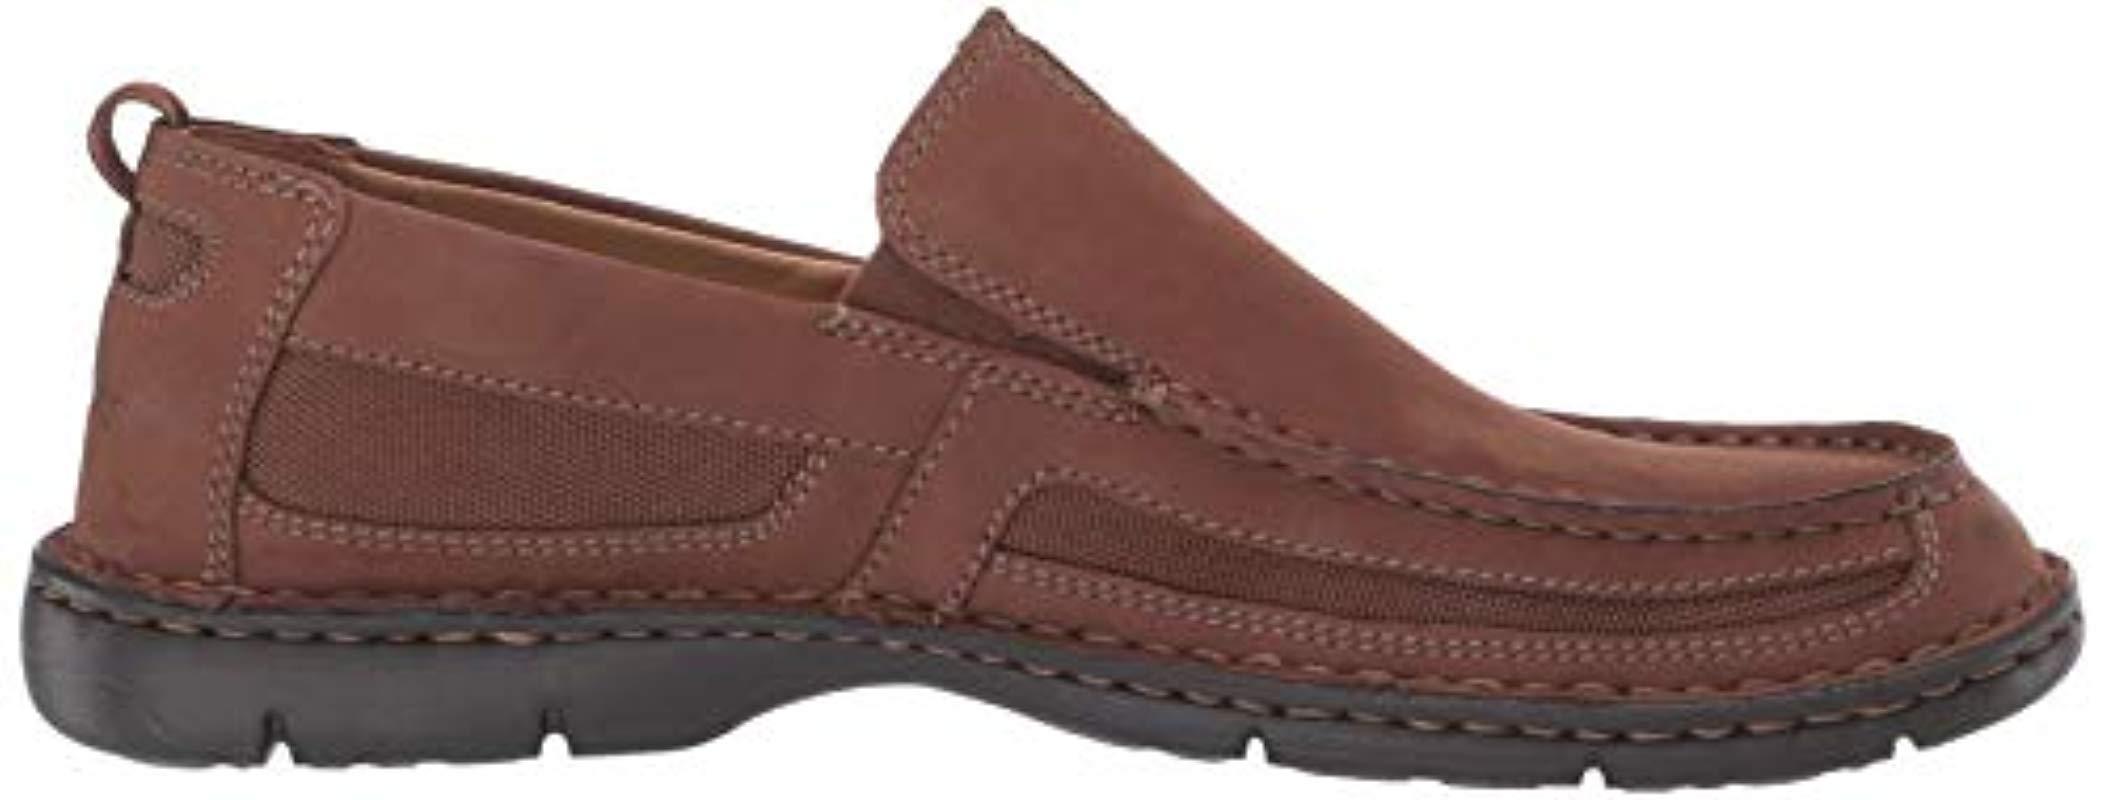 Clarks Lambeth Loafer in Brown Nubuck (Brown) for Men - Save 29% - Lyst